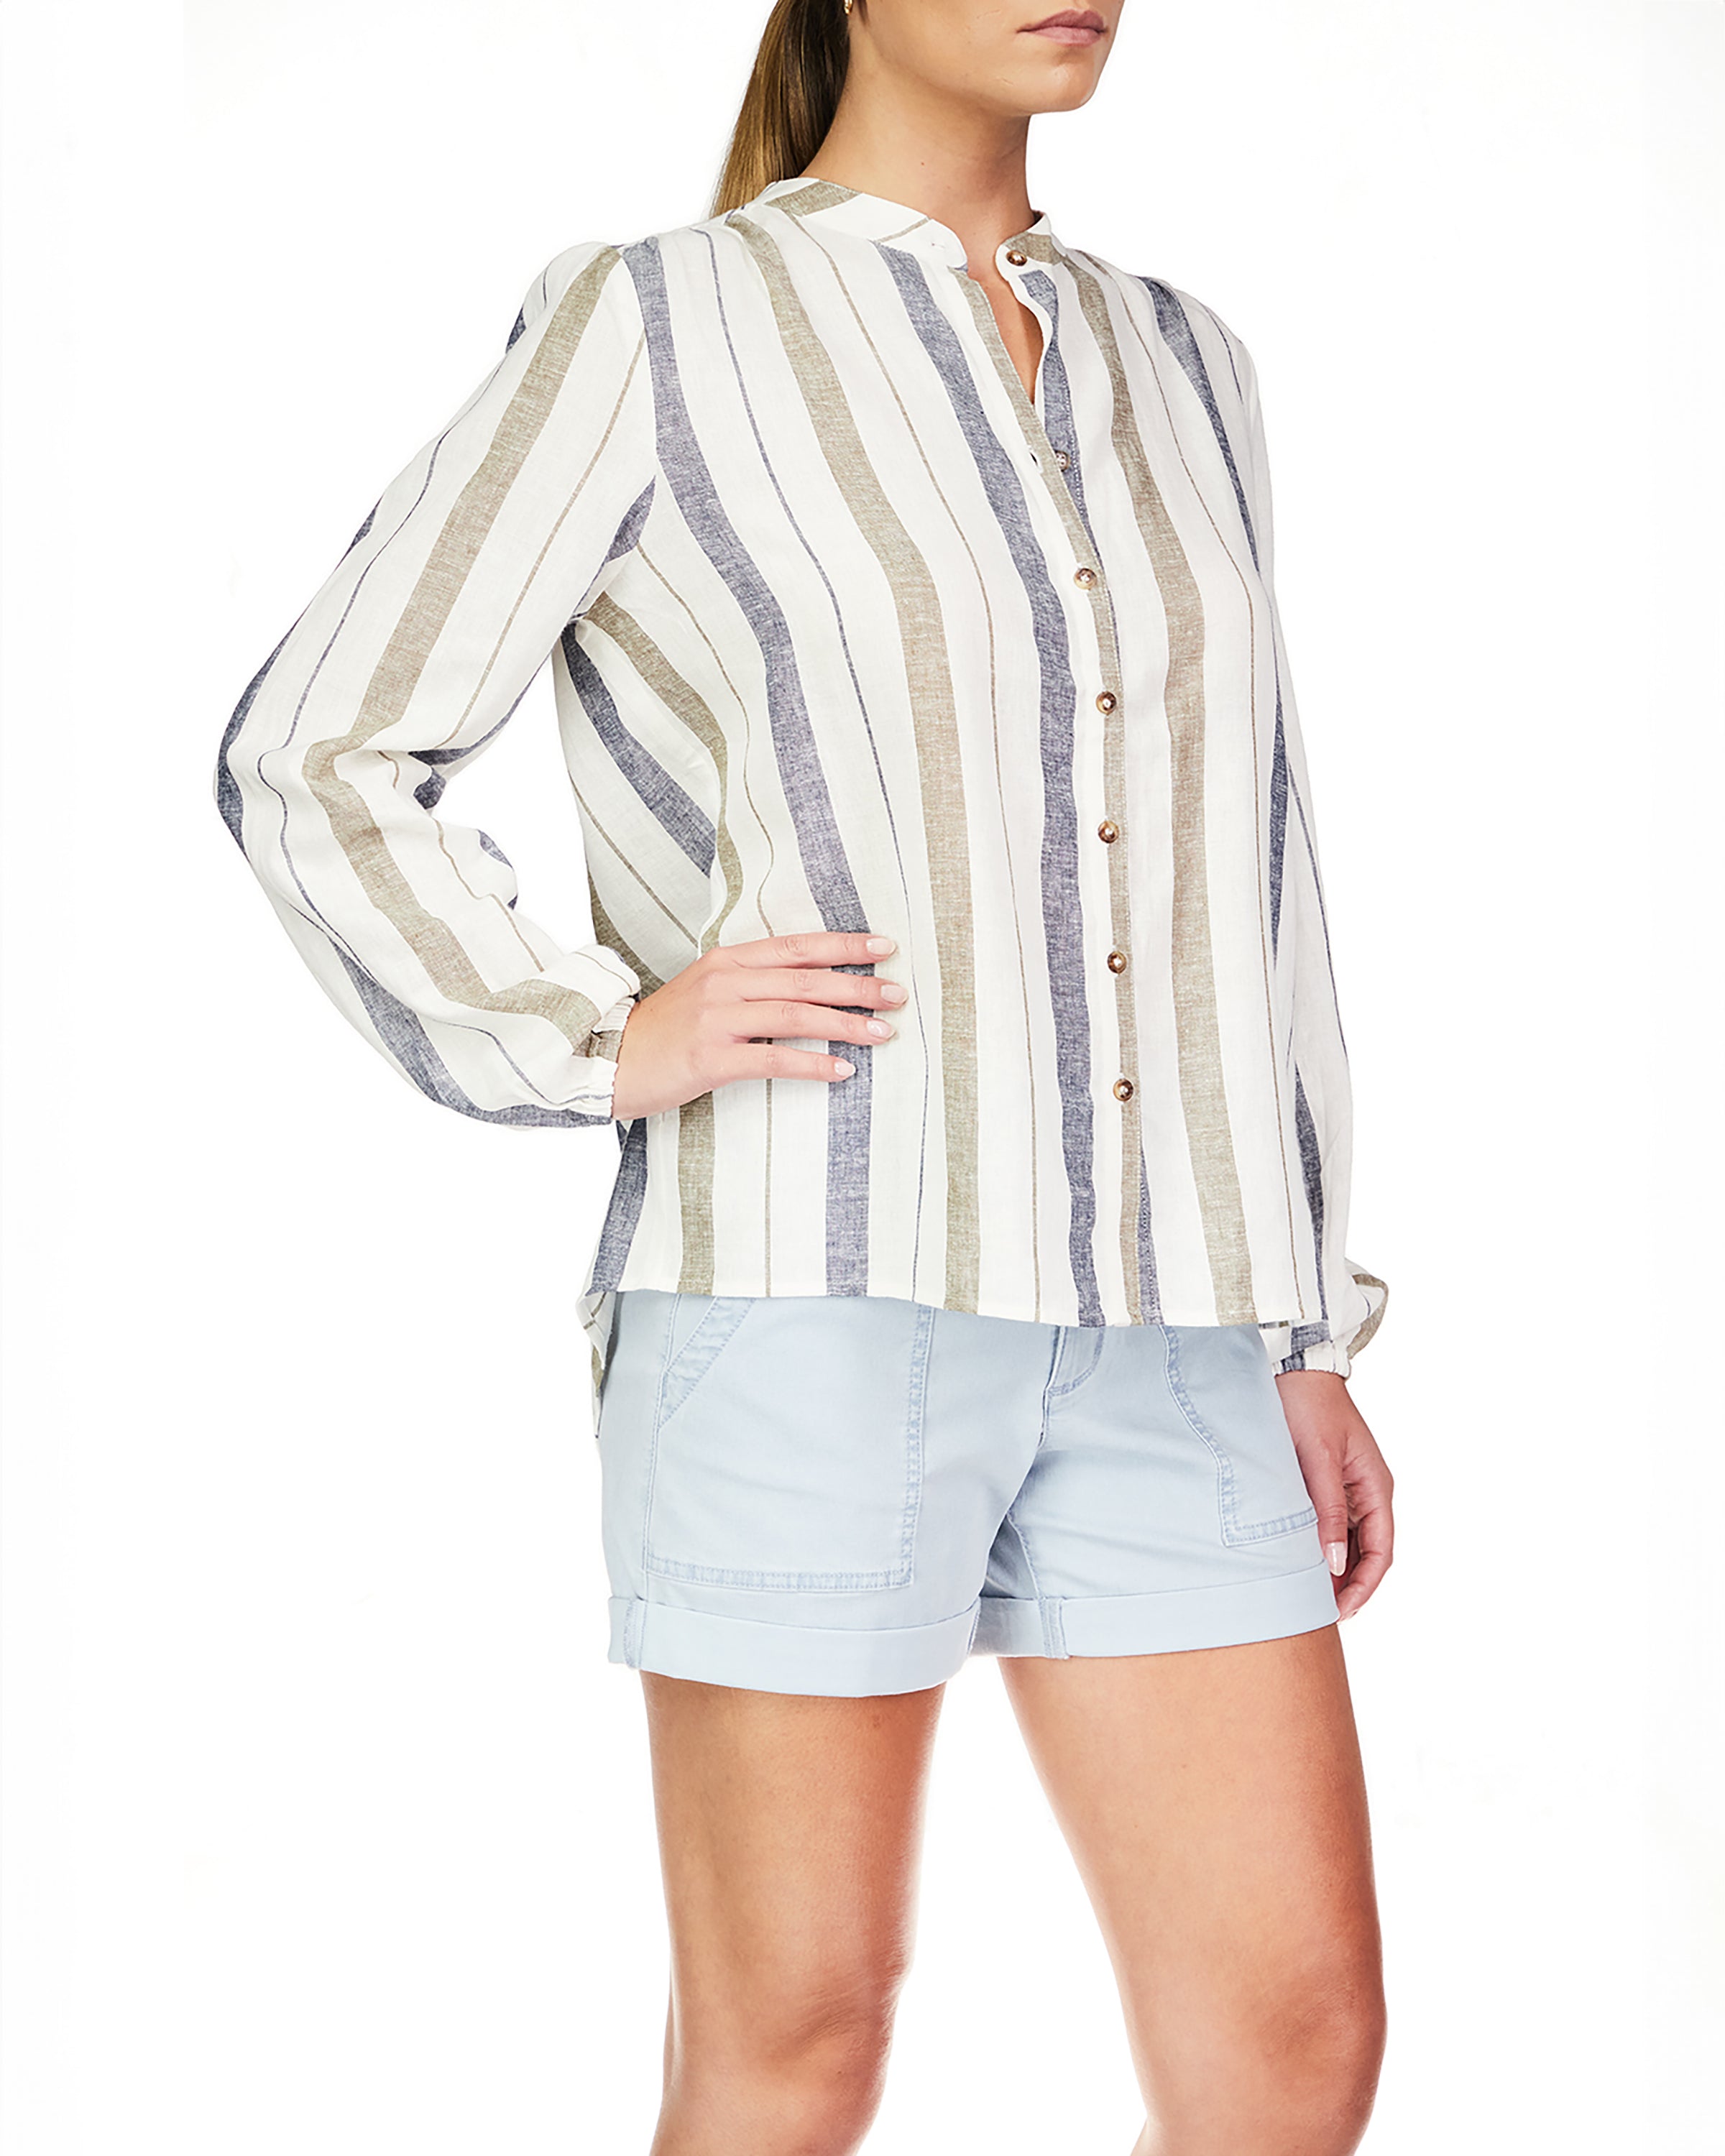 Sanctuary As You Are Button Front Top in Ocean Stripe